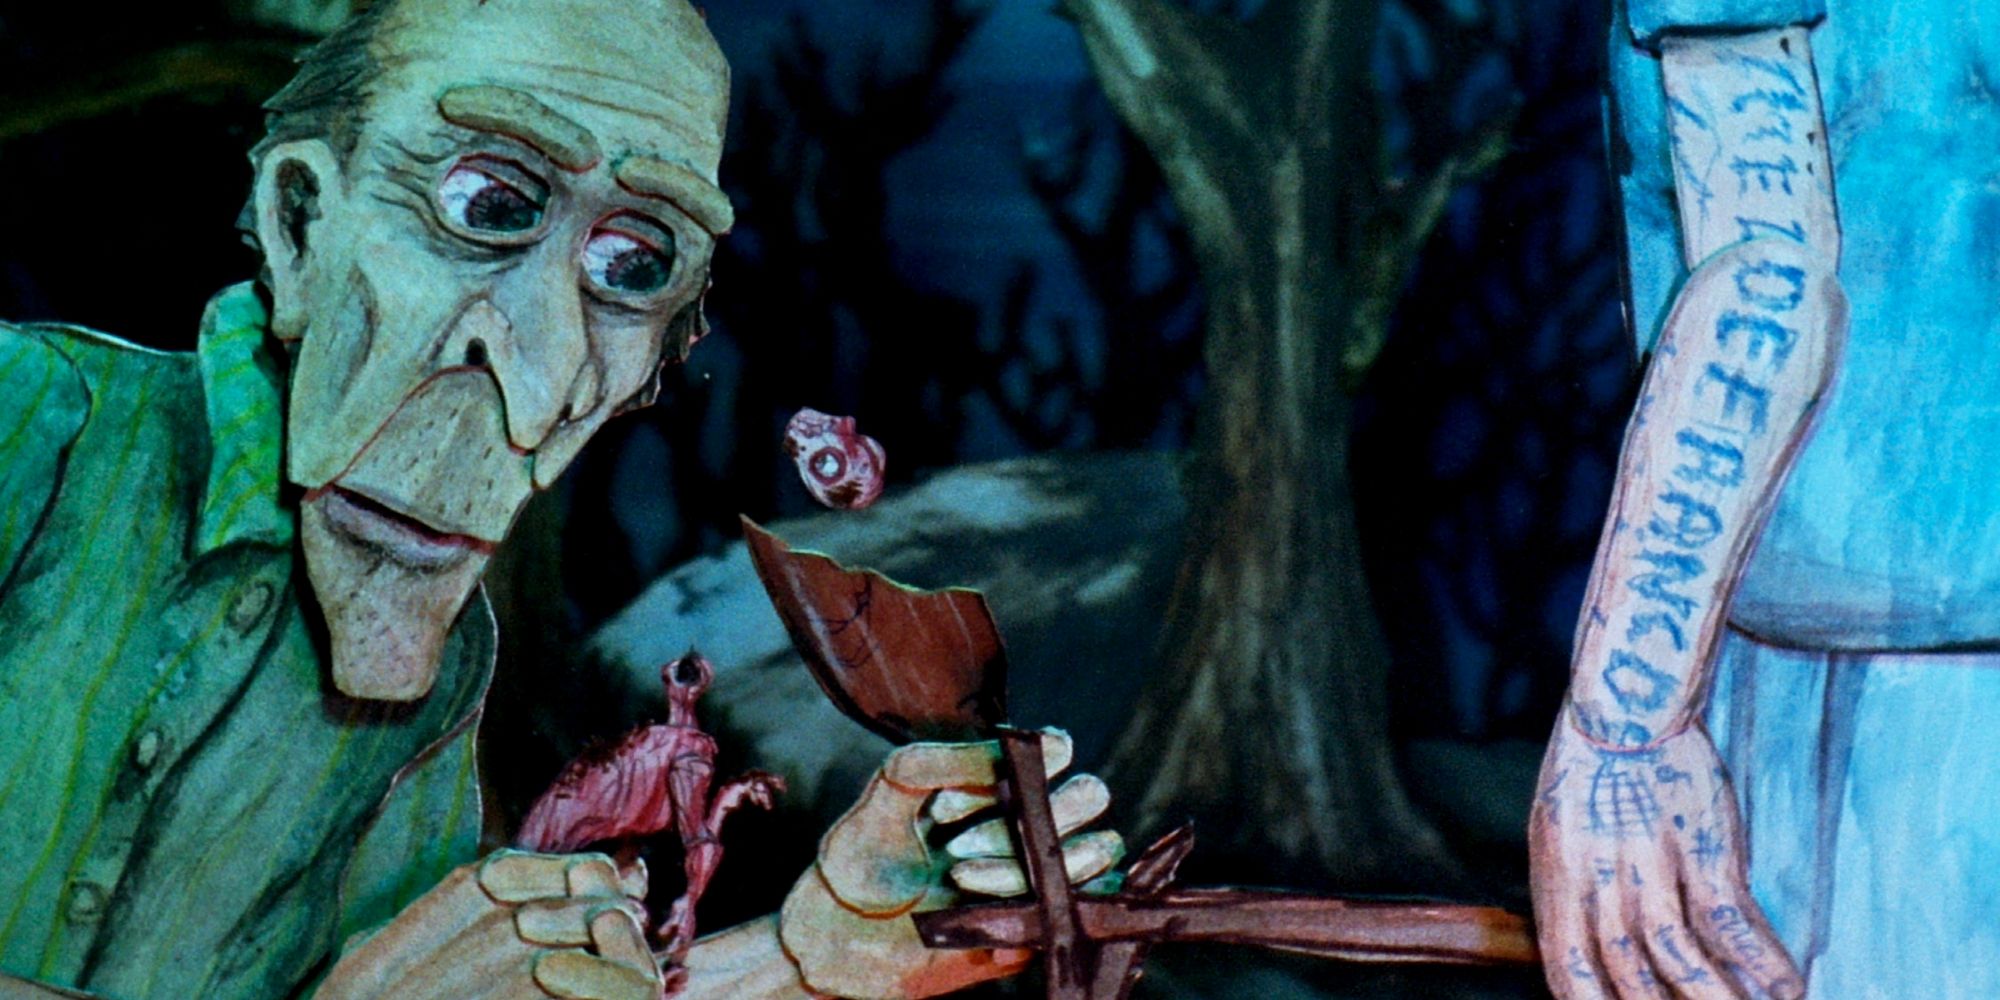 A still from the 2012 animated movie Consuming Spirits.